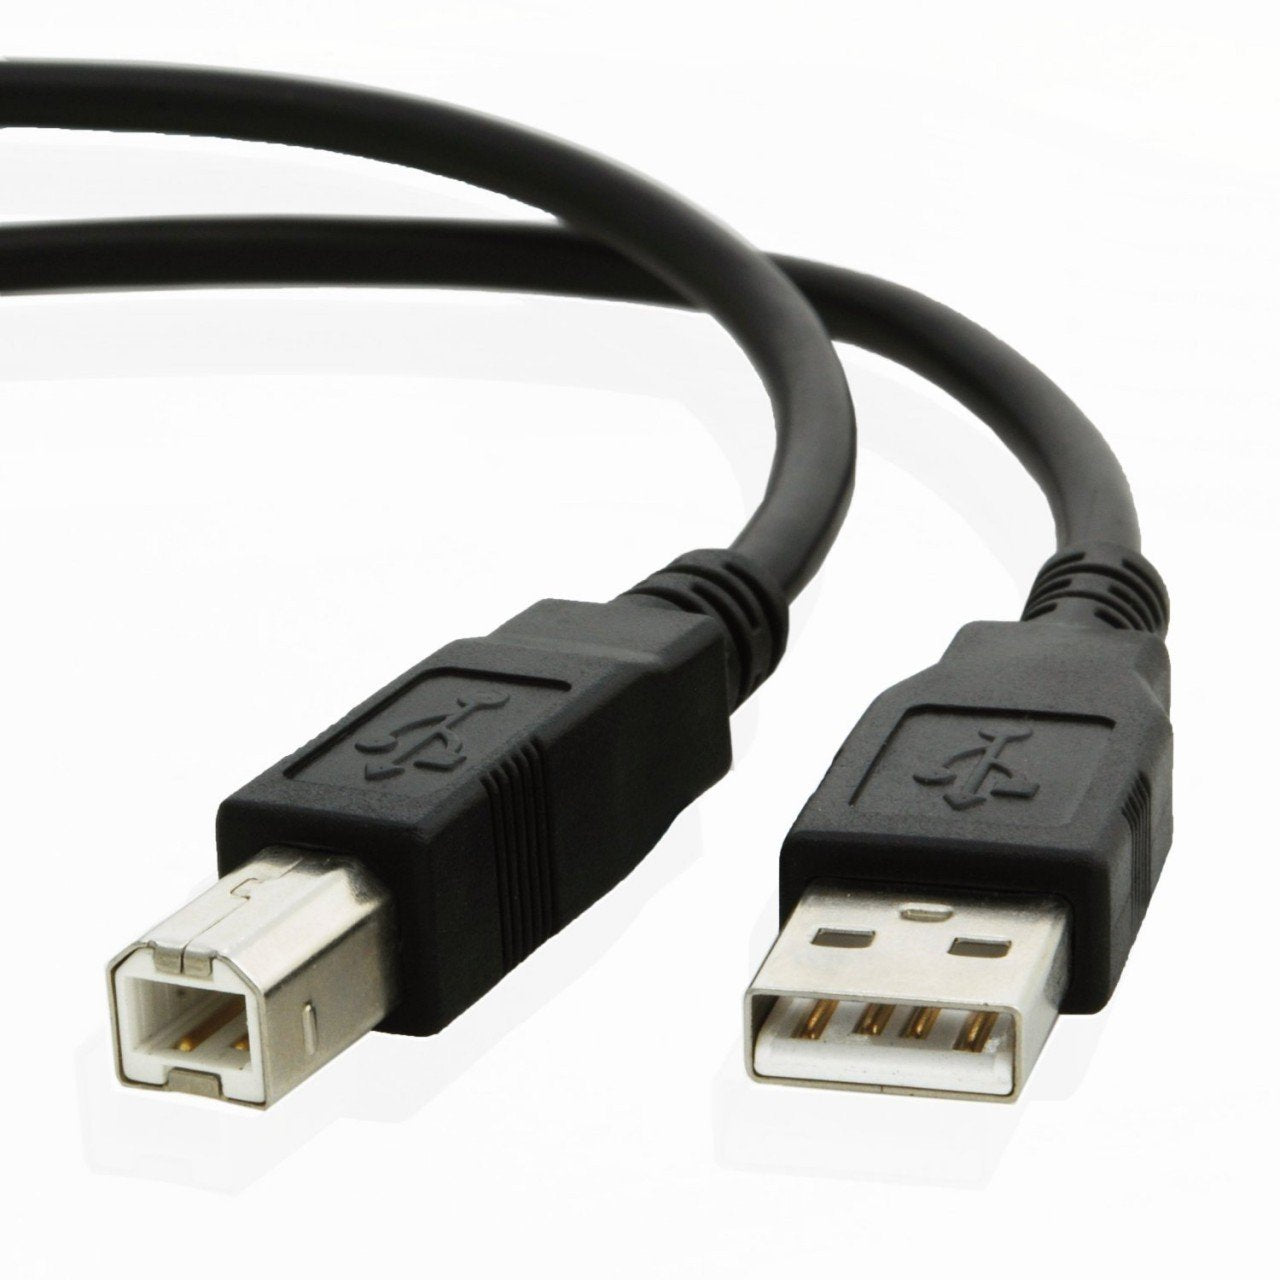 USB cable for Dell B2375dnf